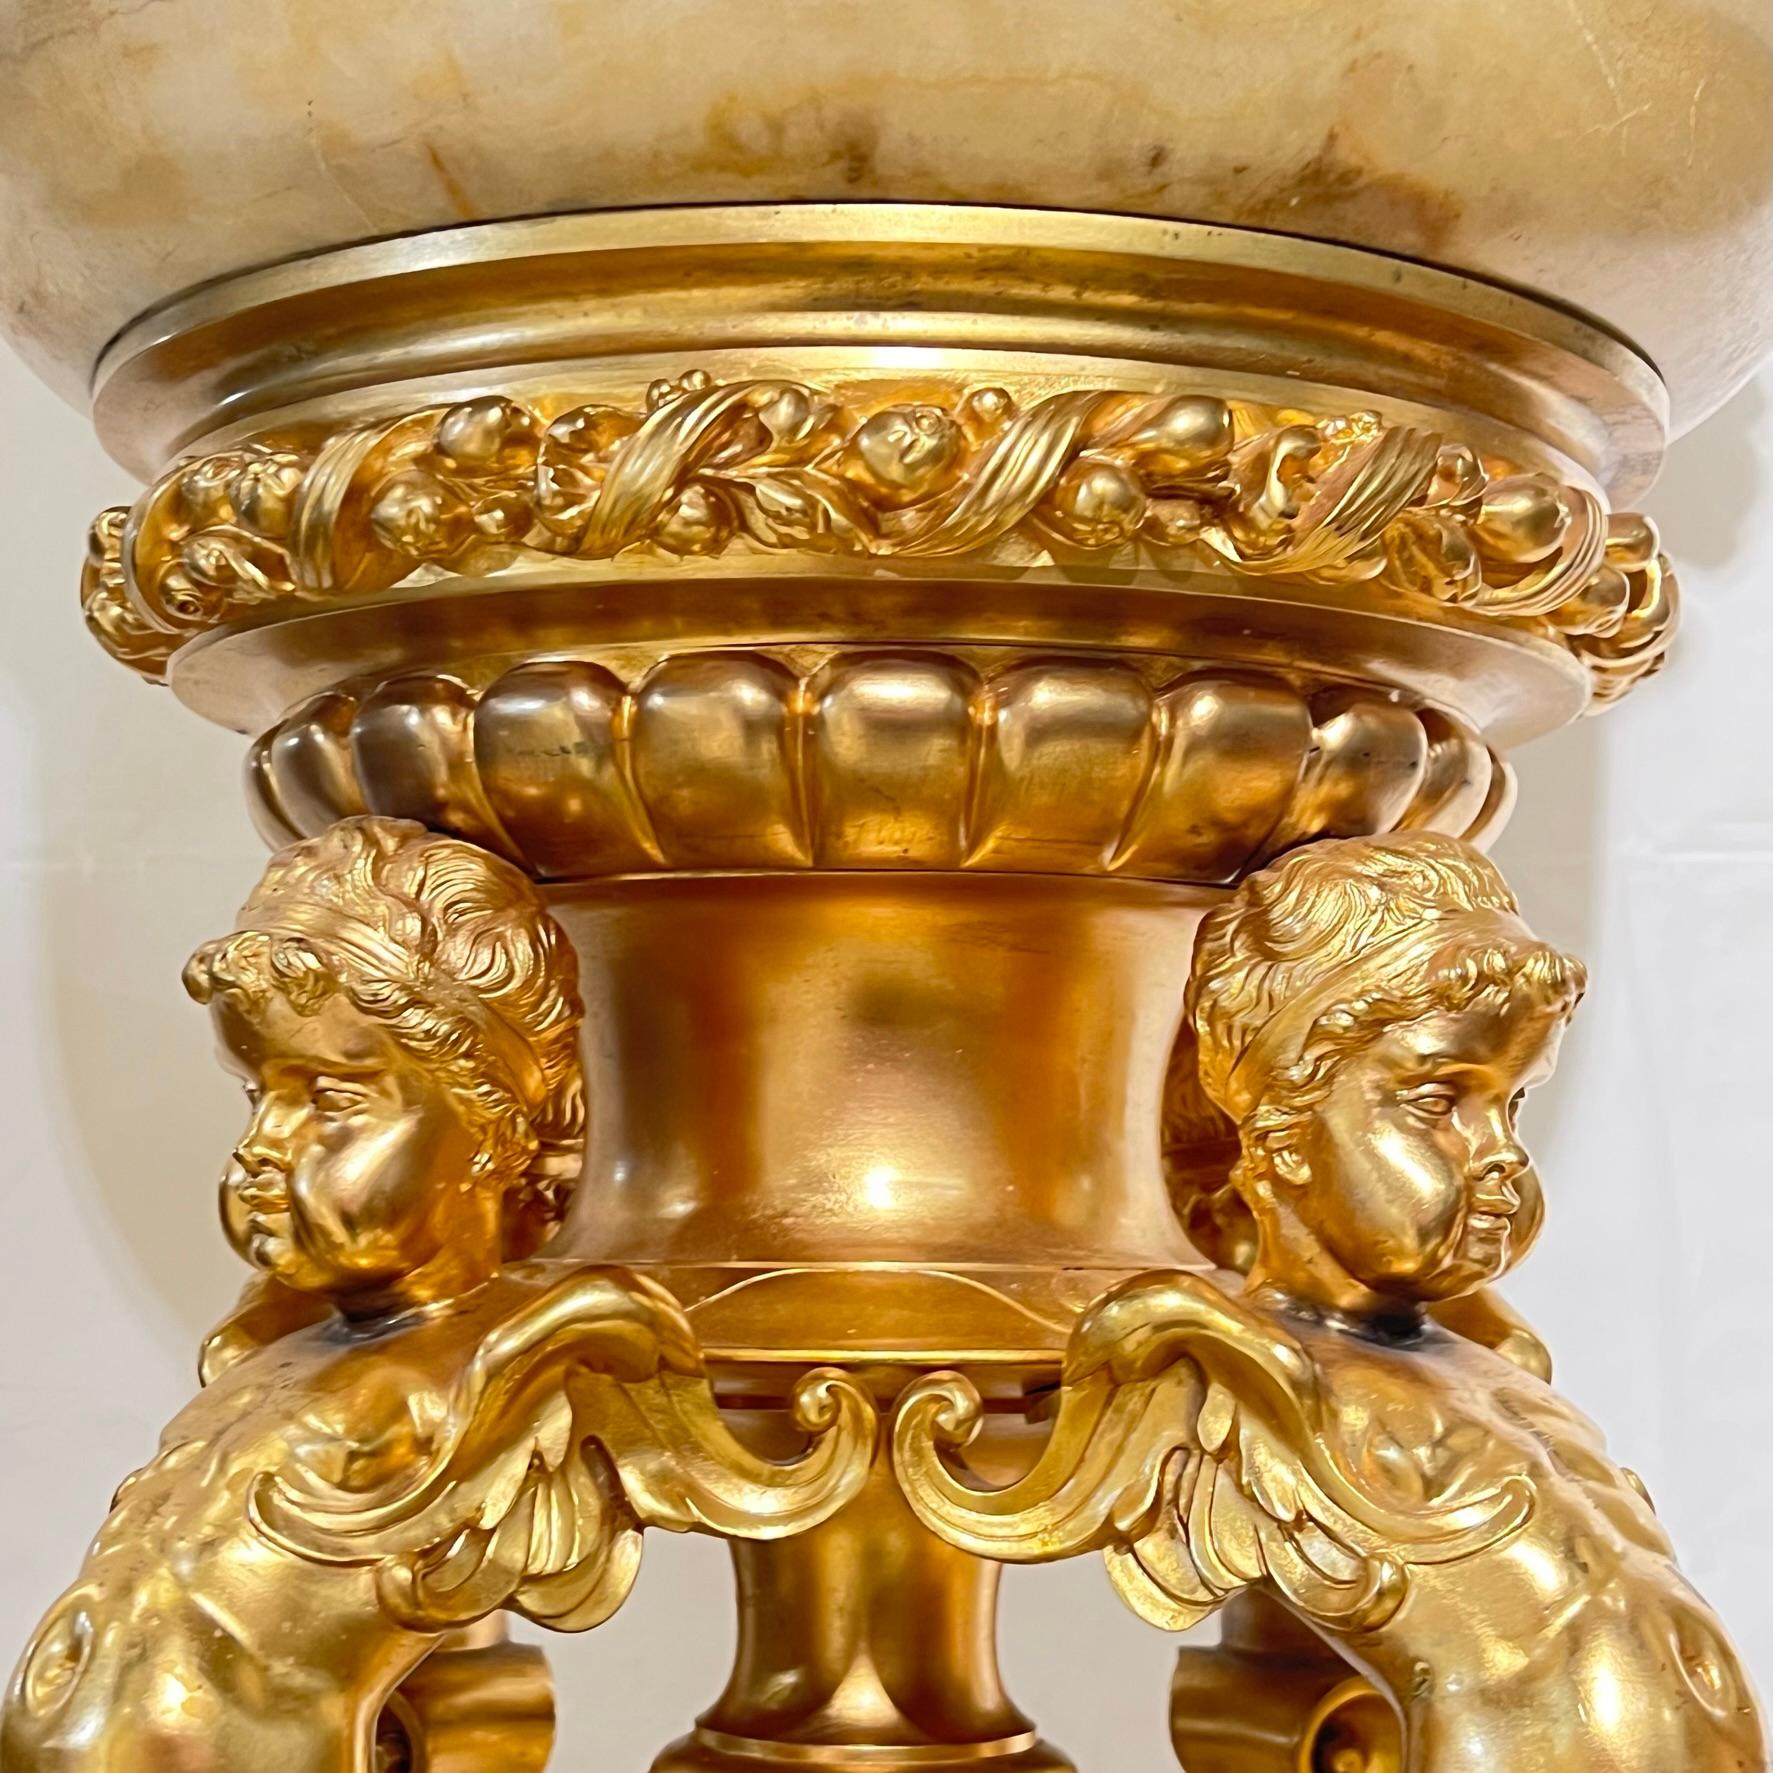 Monumental 19th Century French Neoclassical Onyx and Gilt Bronze Vase For Sale 8